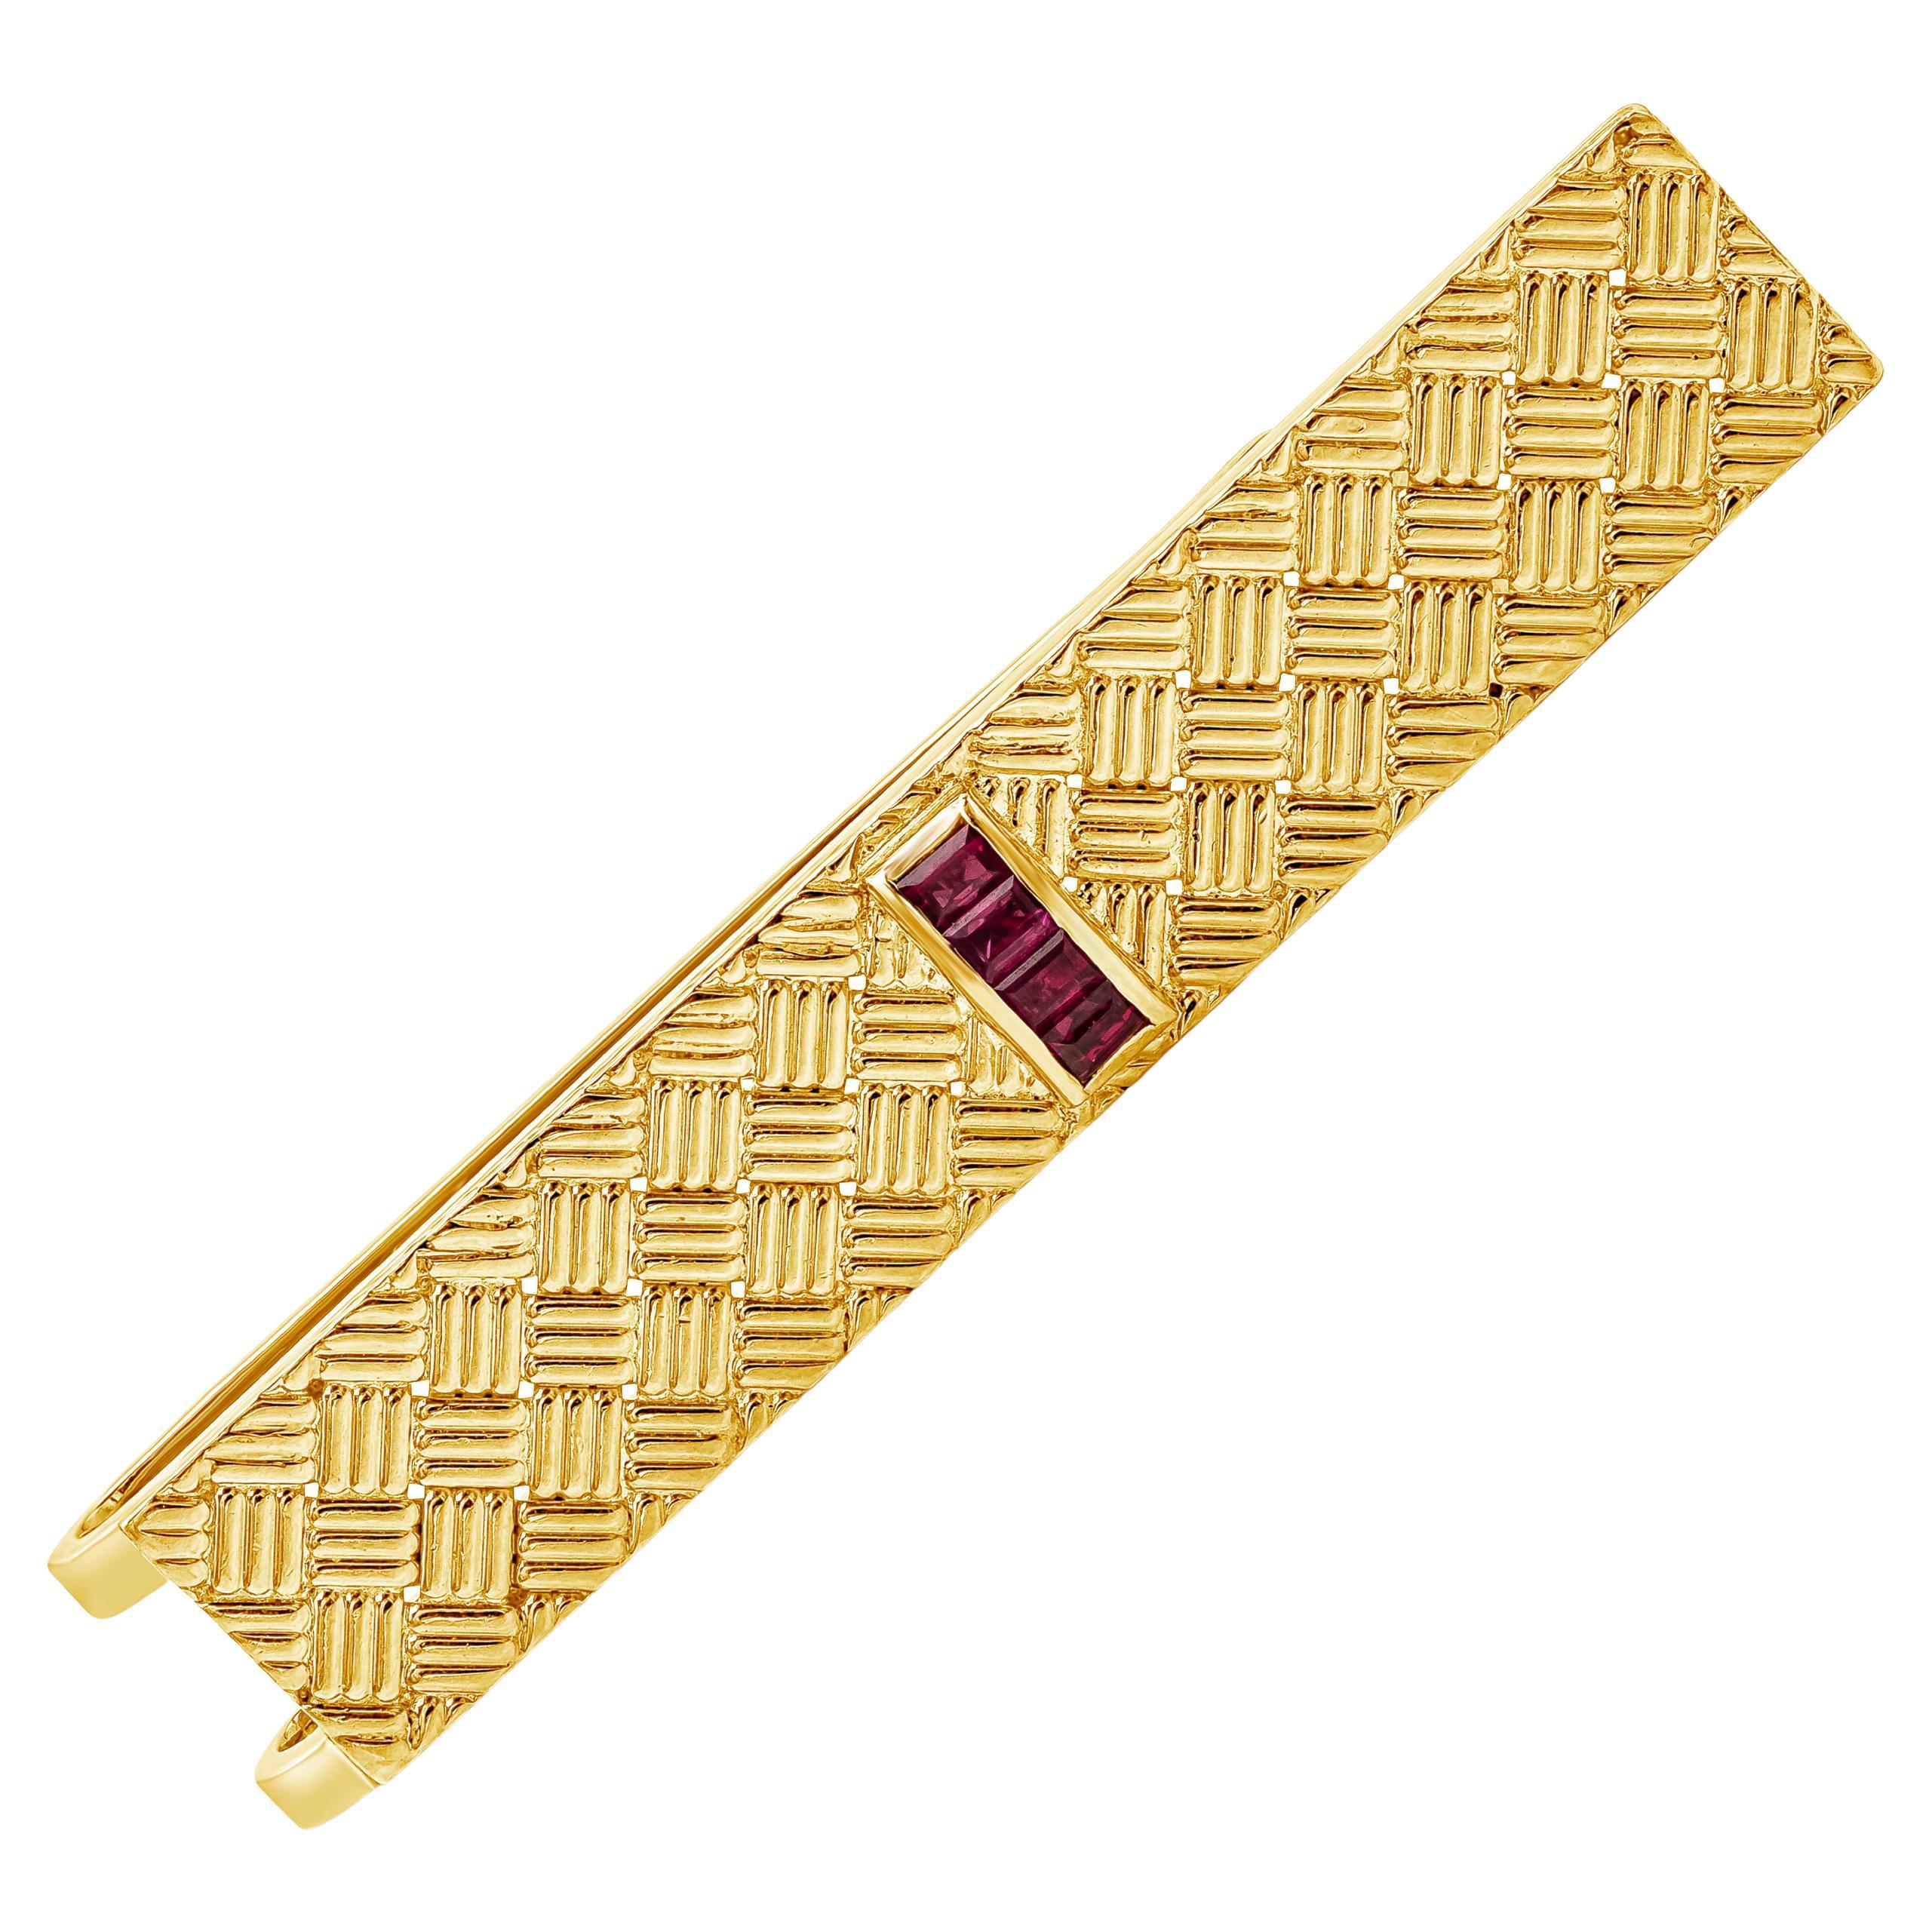 Tiffany & Co. 0.35 Carat Ruby Weave Design Tie Clip in 18k Yellow Gold